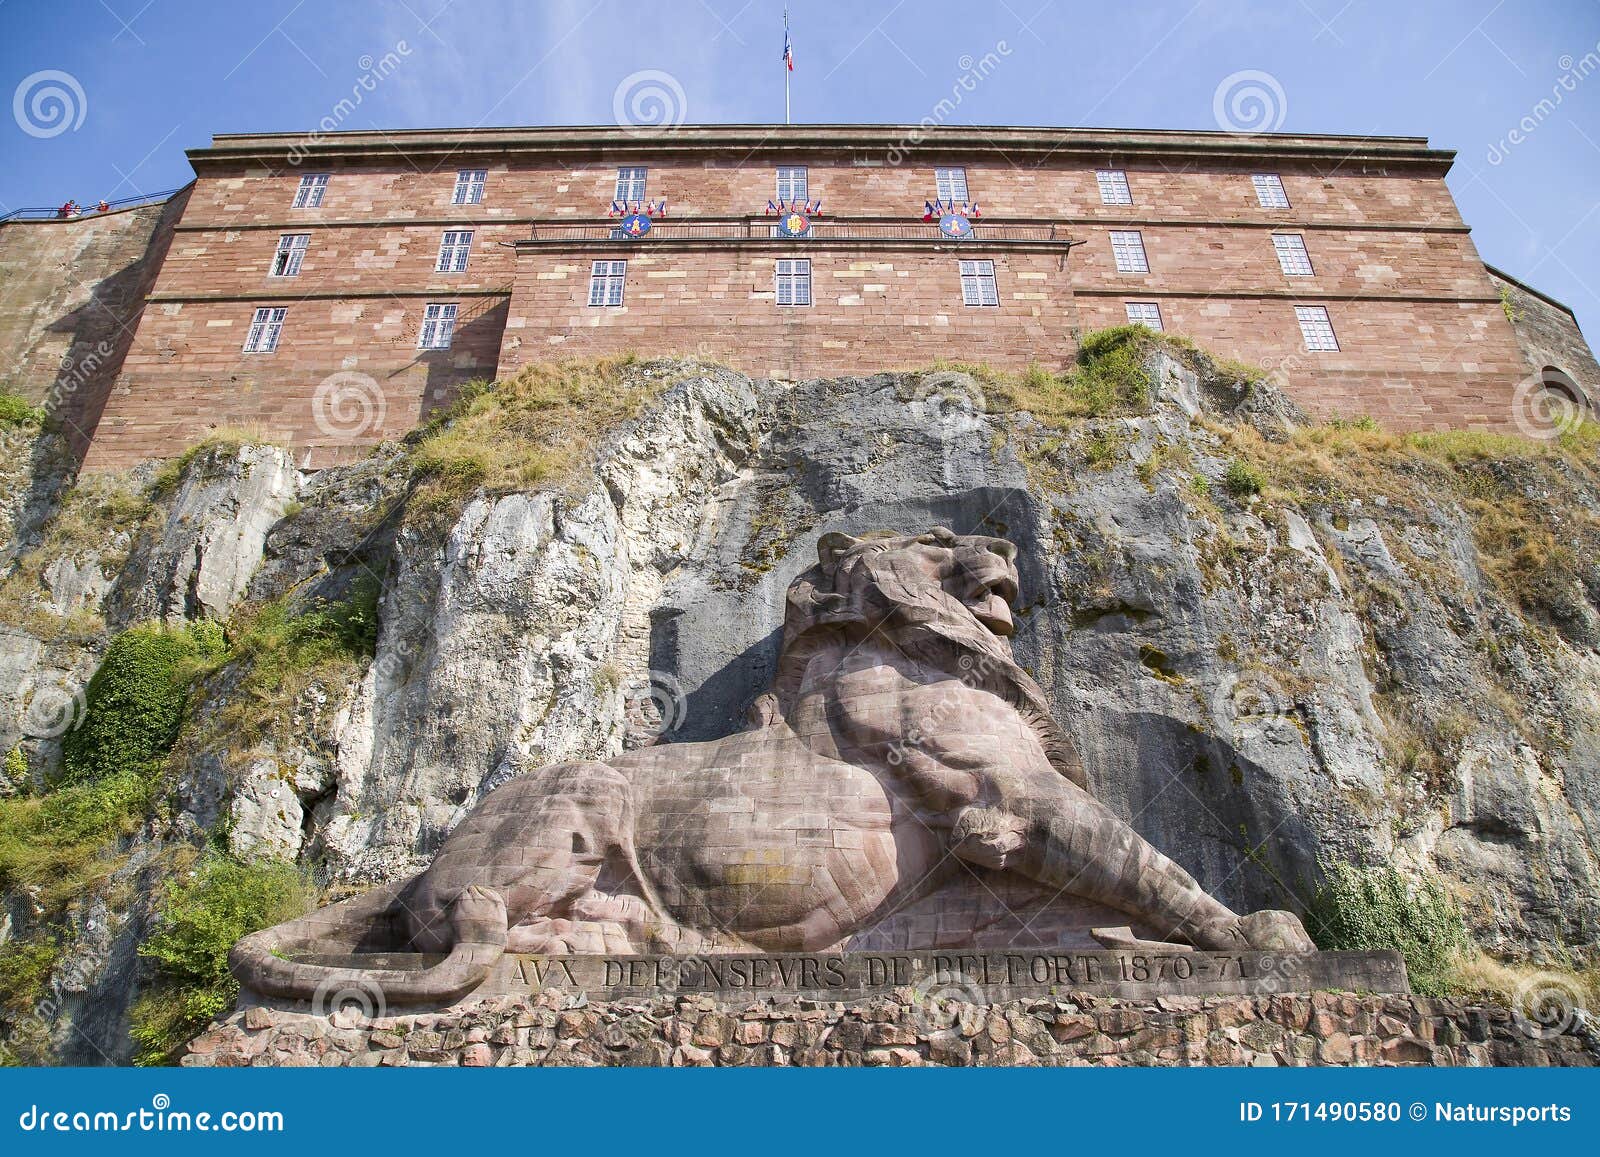 Lion of Belfort stock photo. Image of french, lion, architecture ...